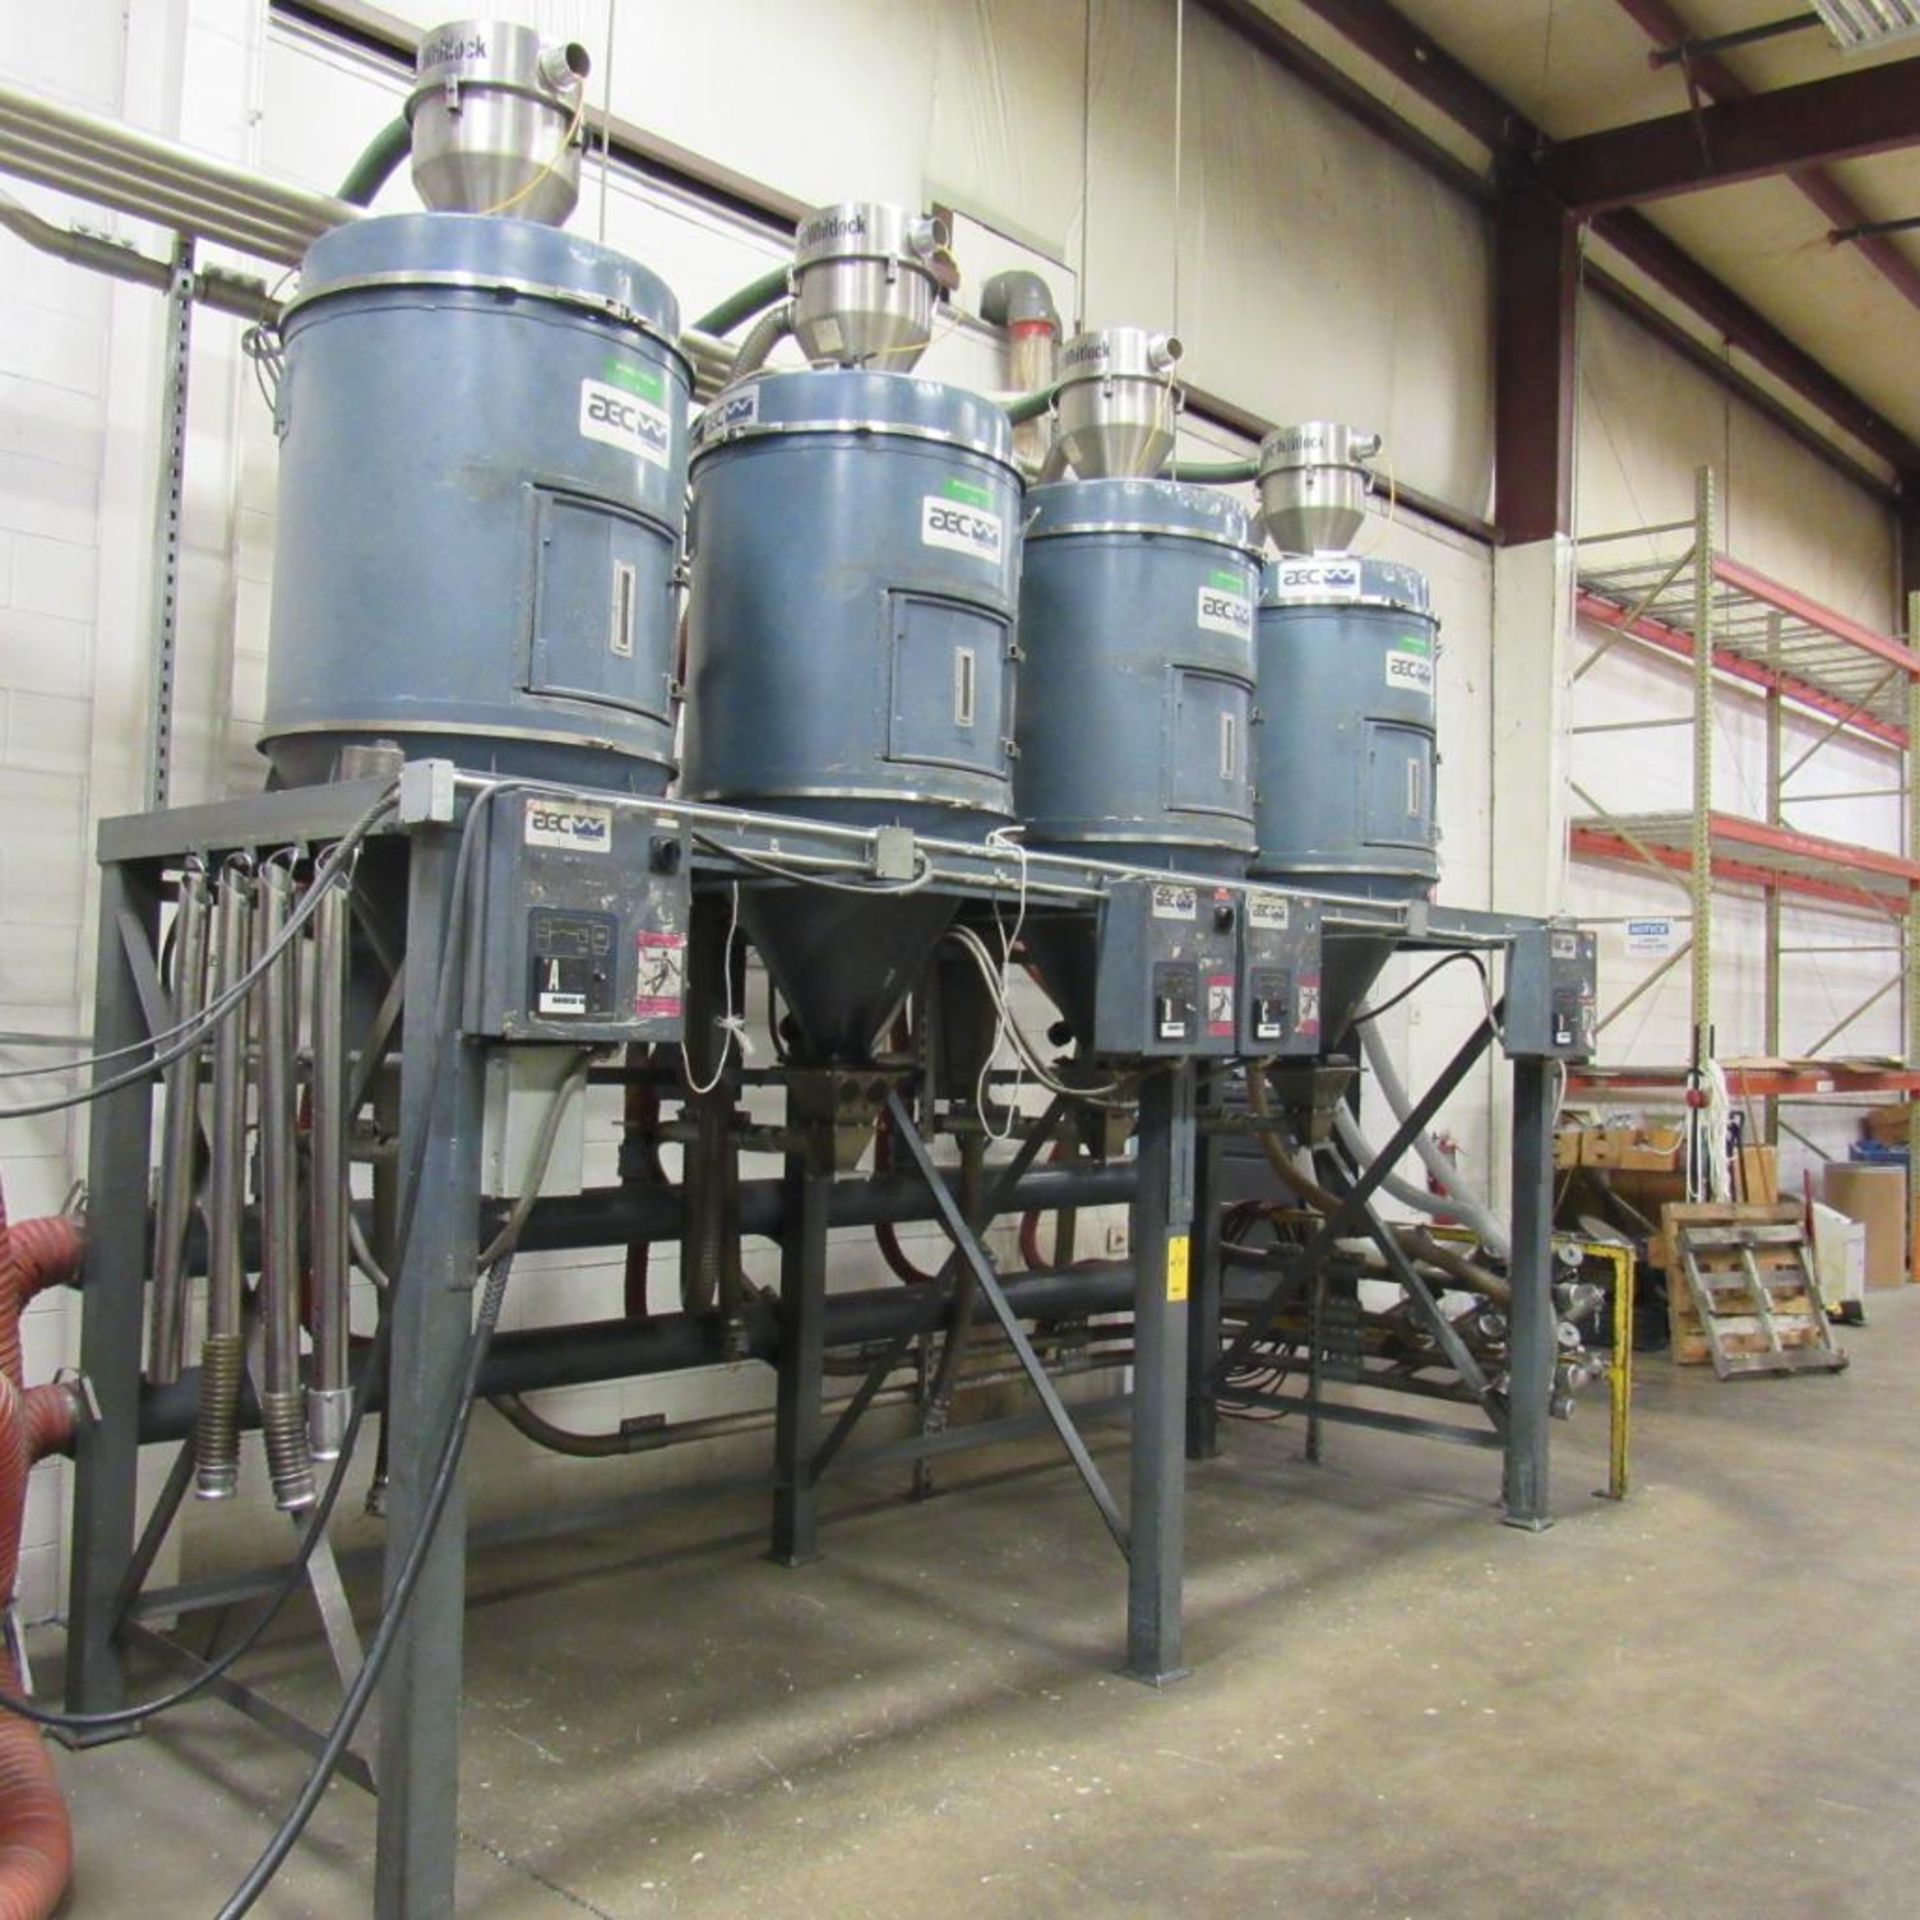 AEC Whitlock WD-600 CHEQ Dryer w/(4) DH-170 MICHEQ Hopper Dryers (Location: Bldg. 1) - Image 4 of 10